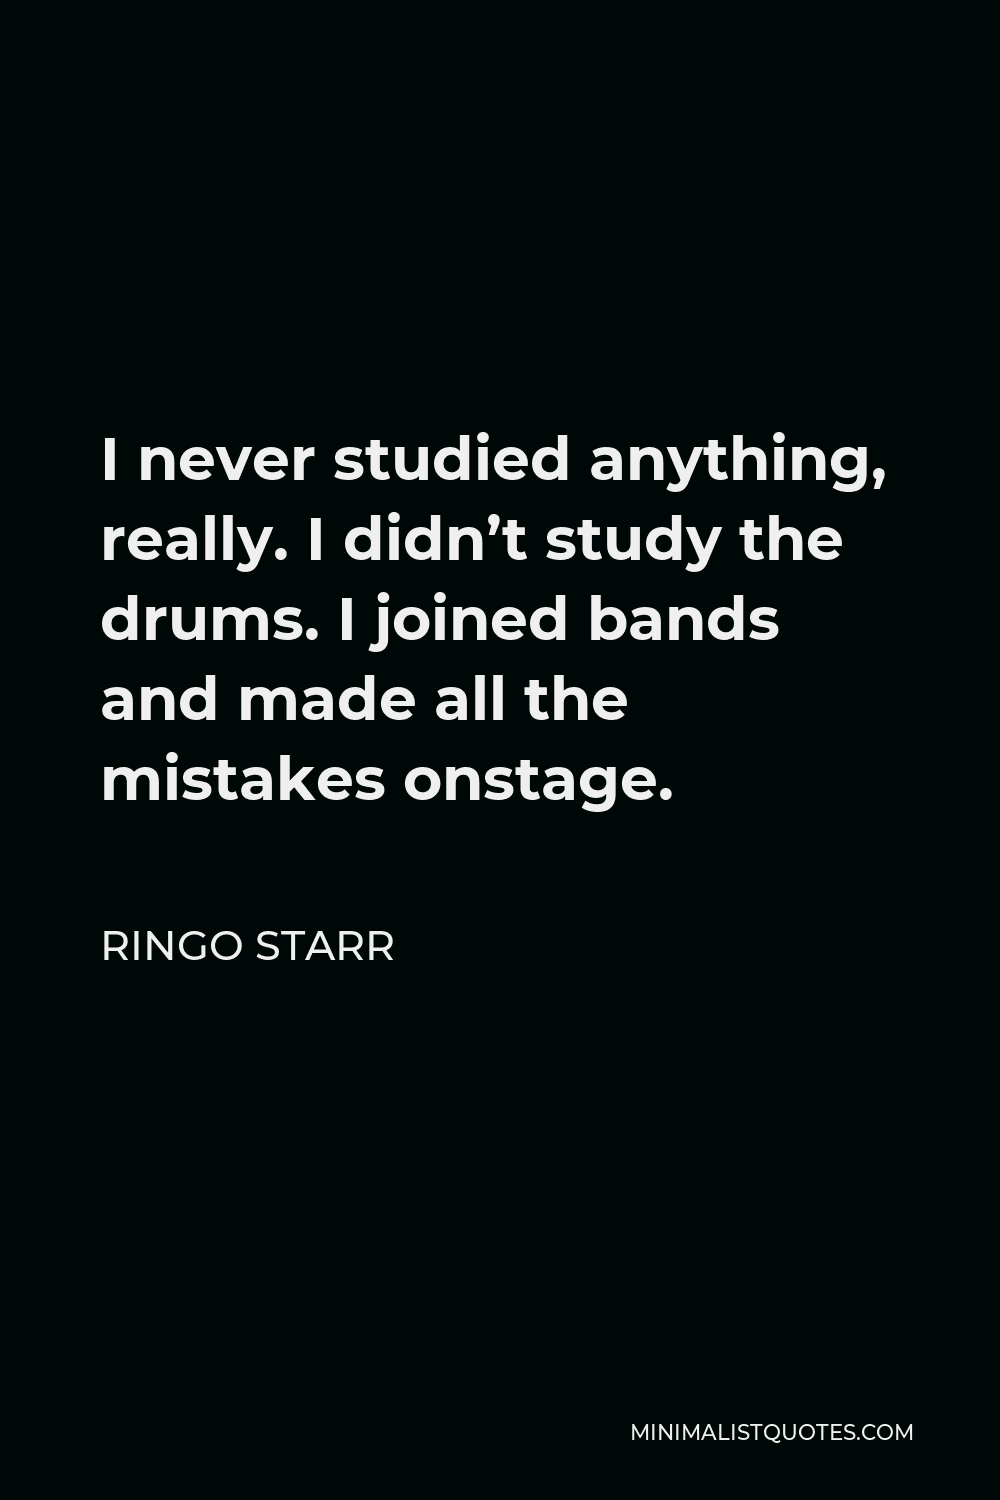 Ringo Starr Quote - I never studied anything, really. I didn’t study the drums. I joined bands and made all the mistakes onstage.